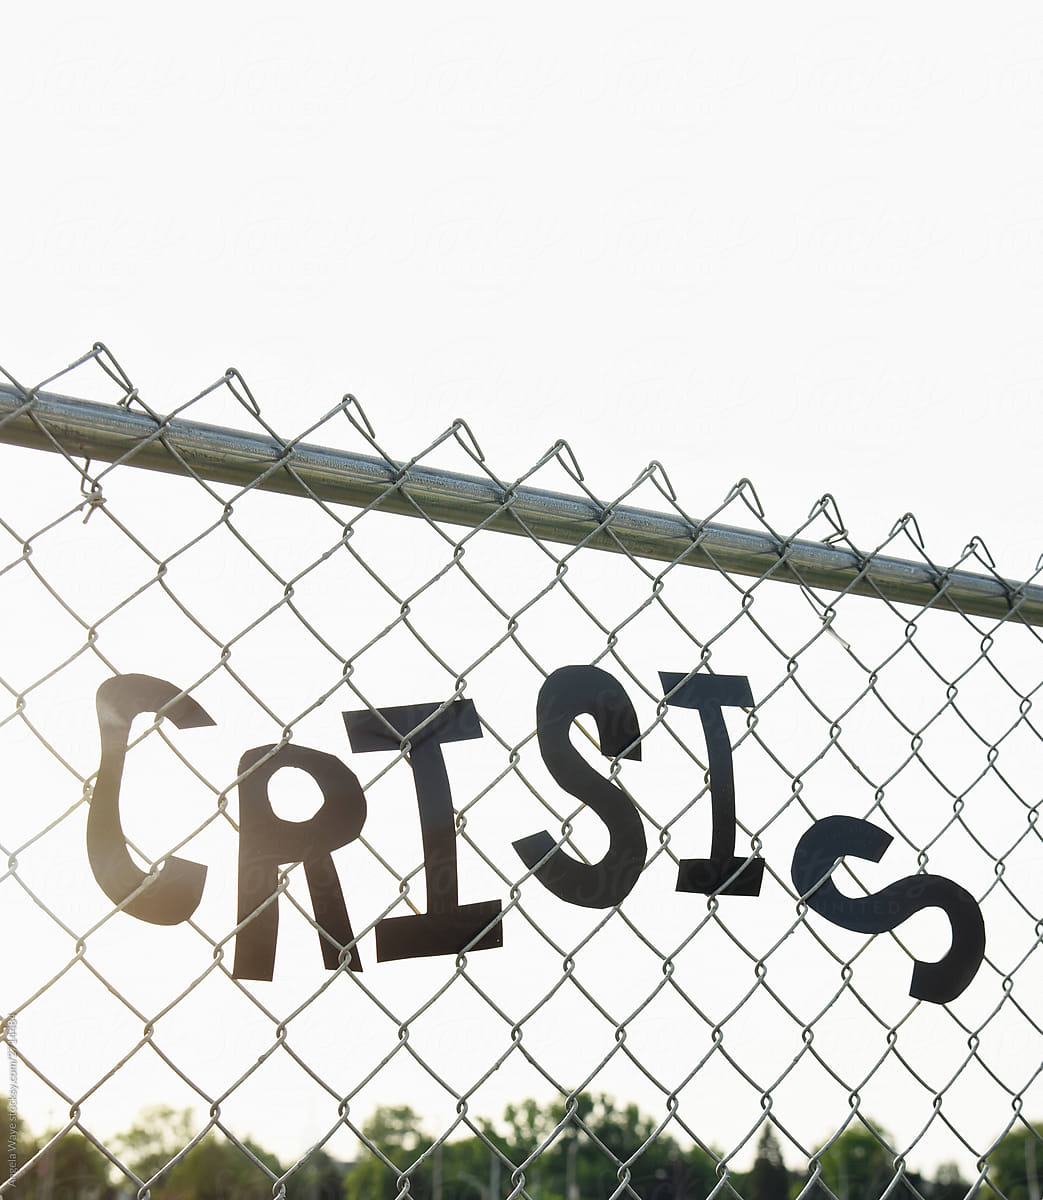 Crisis Words on Fence Border